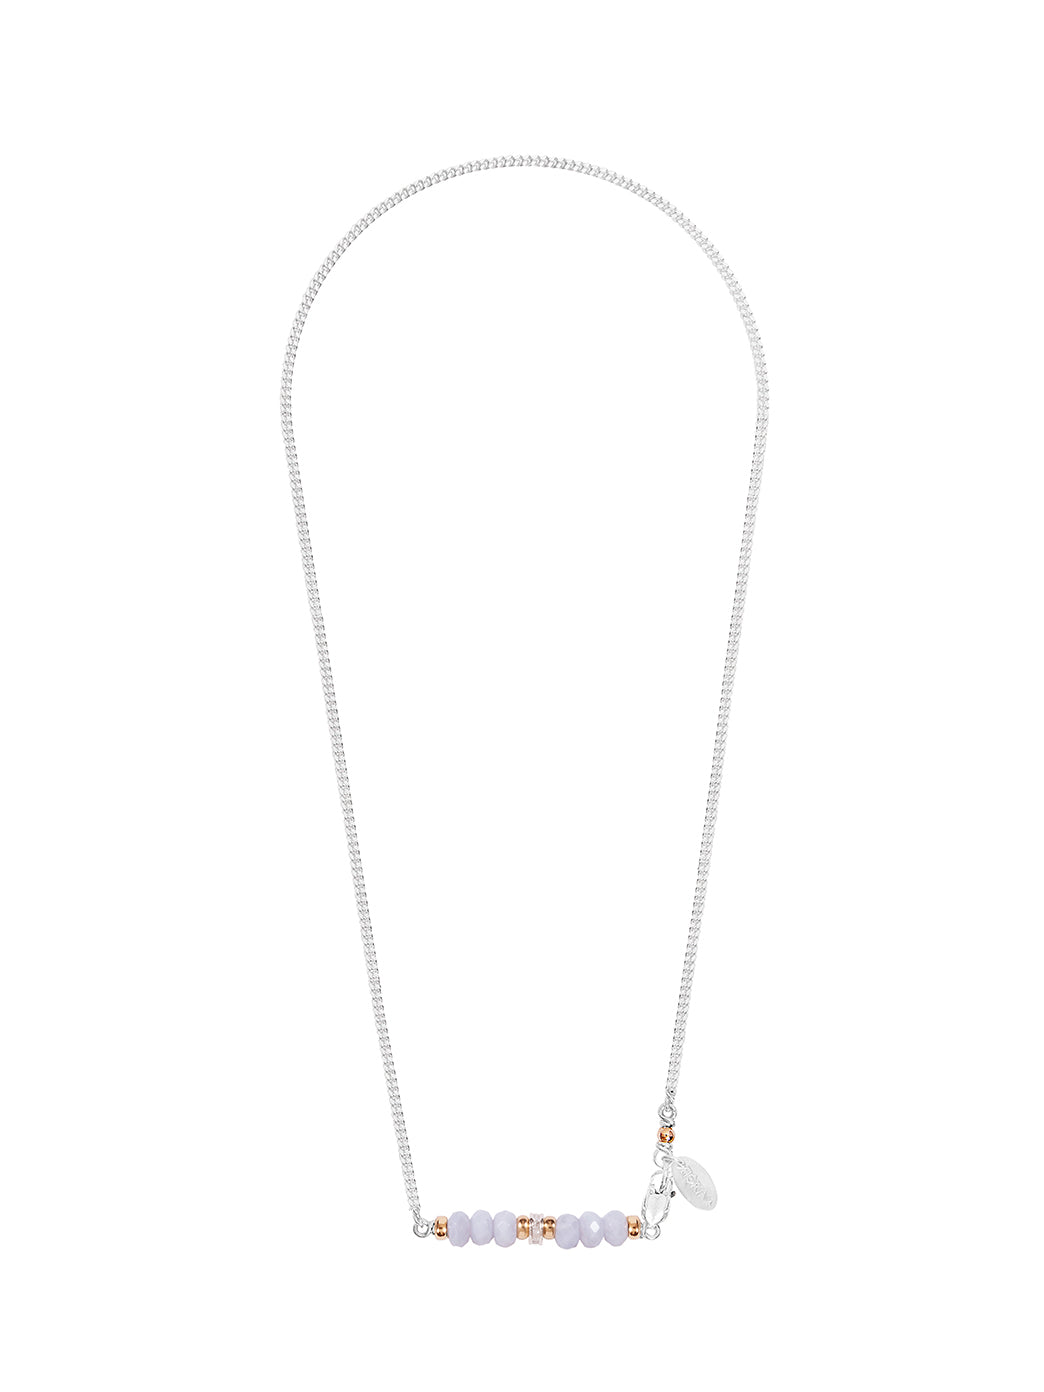 Fiorina Jewellery Silver Romance Necklace Chalcedony Faceted